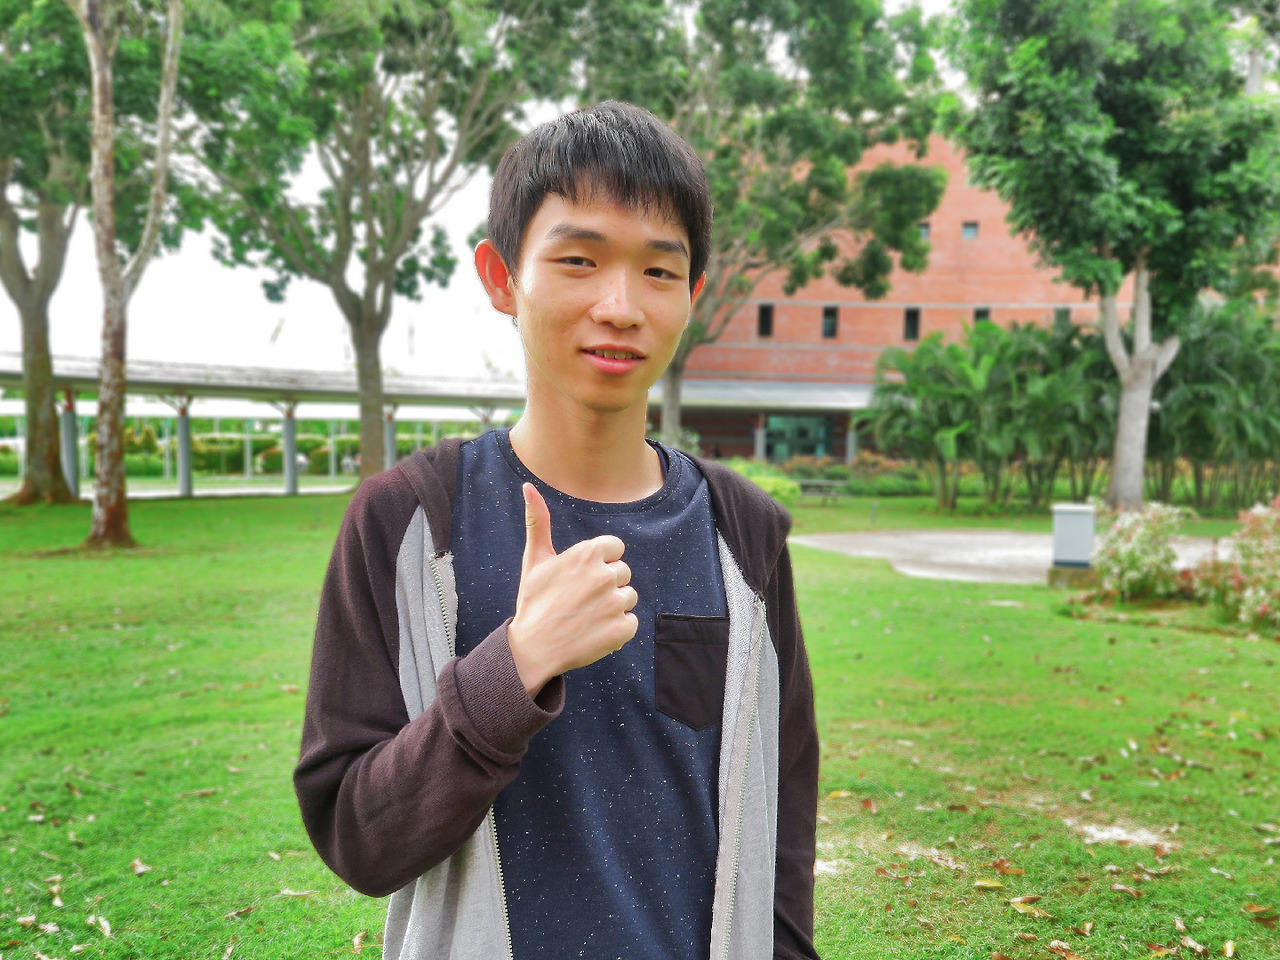 “I’m a mechanical engineering student. My initial interest was actually in chemical engineering because I thought it would be like chemistry class in school and fun working with all kinds of chemicals. However, I finally decided on mechanical...